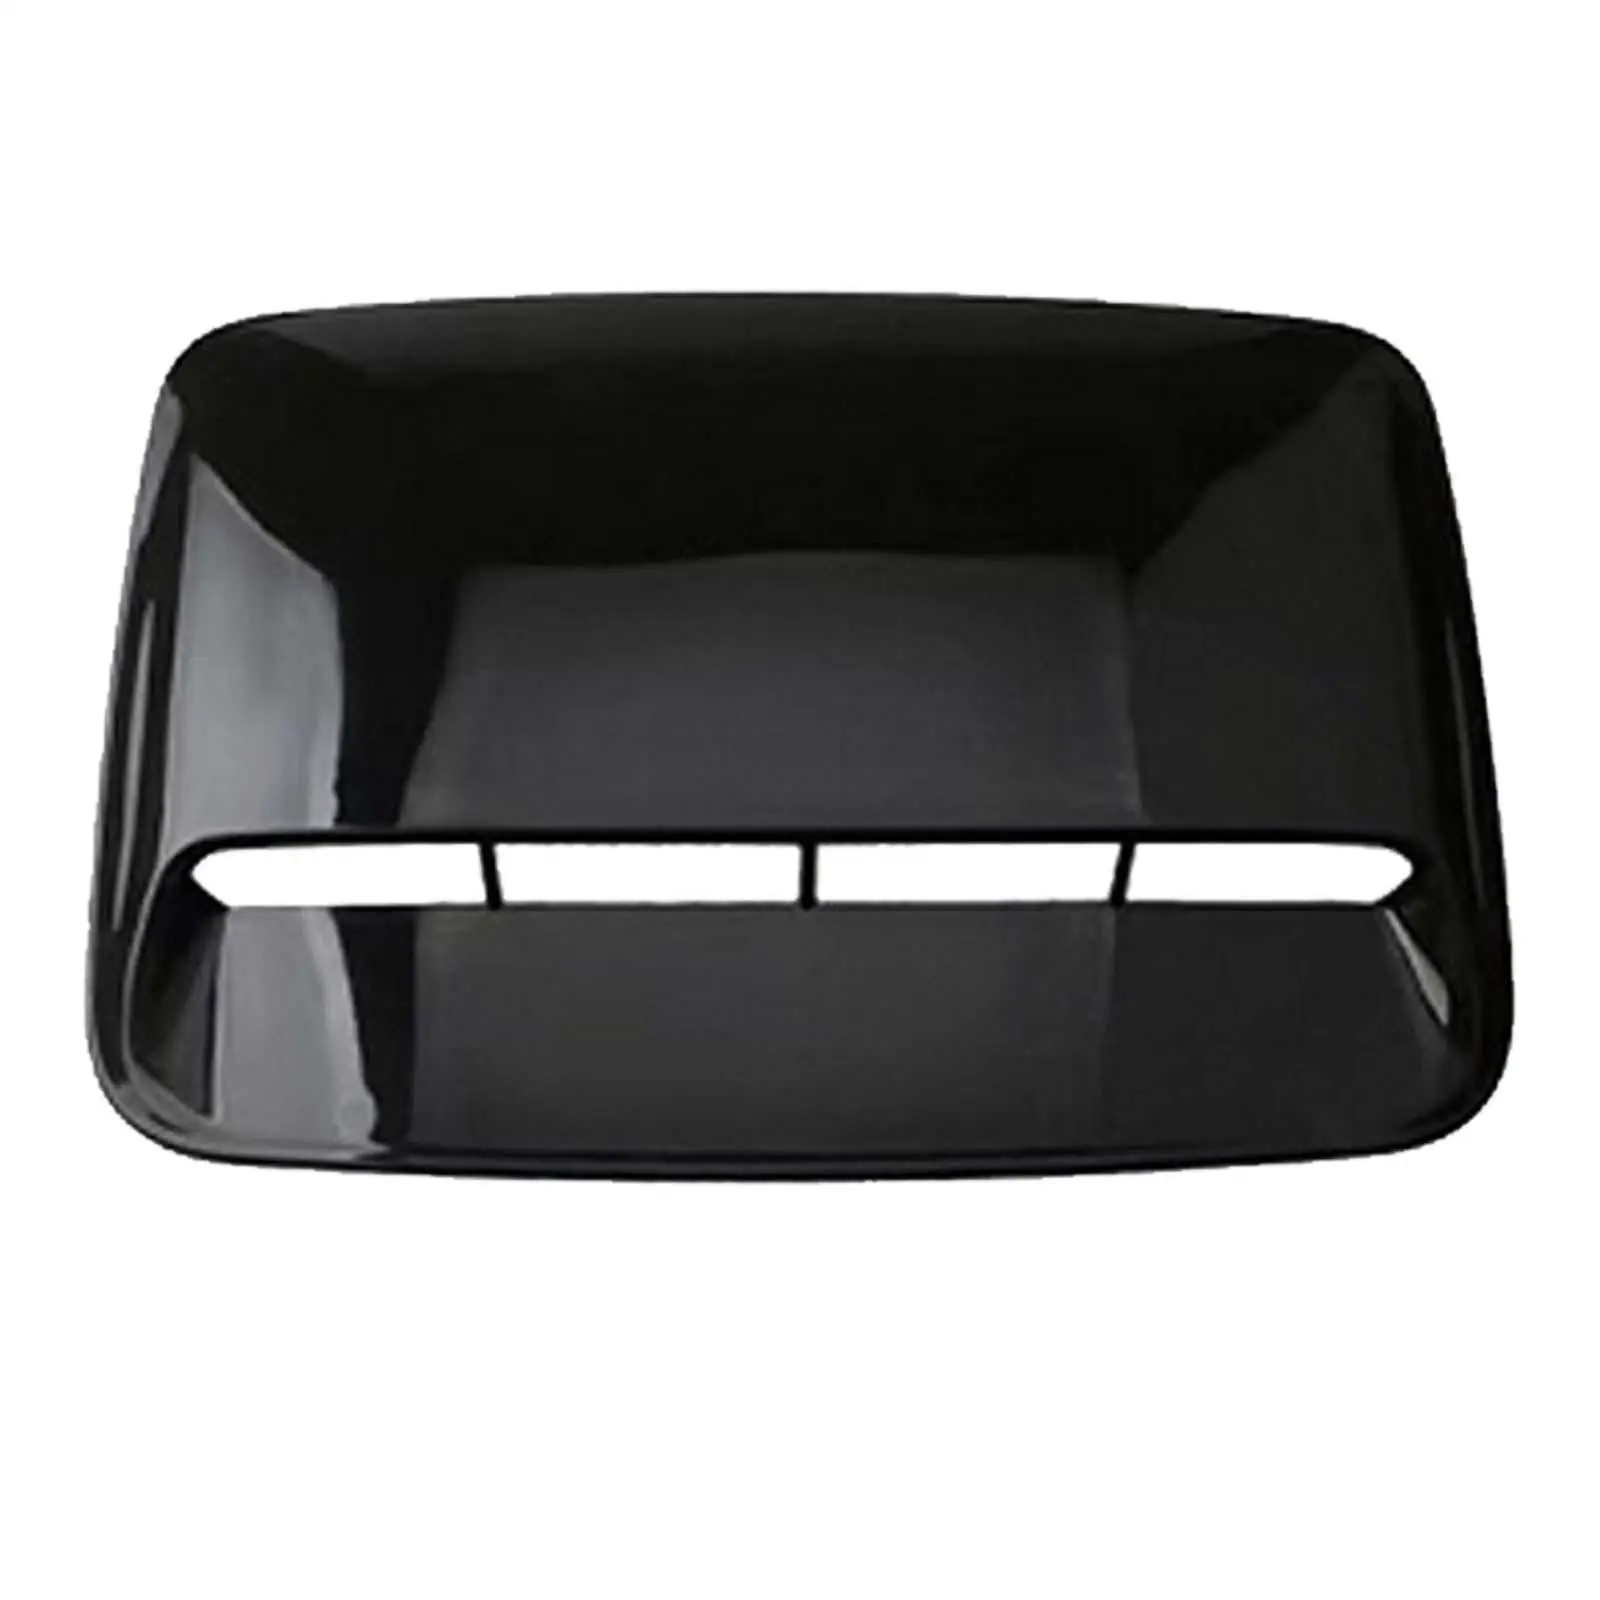 Hood Scoop Vent Cover Car Hood Vent for Car Modification Sturdy Quality